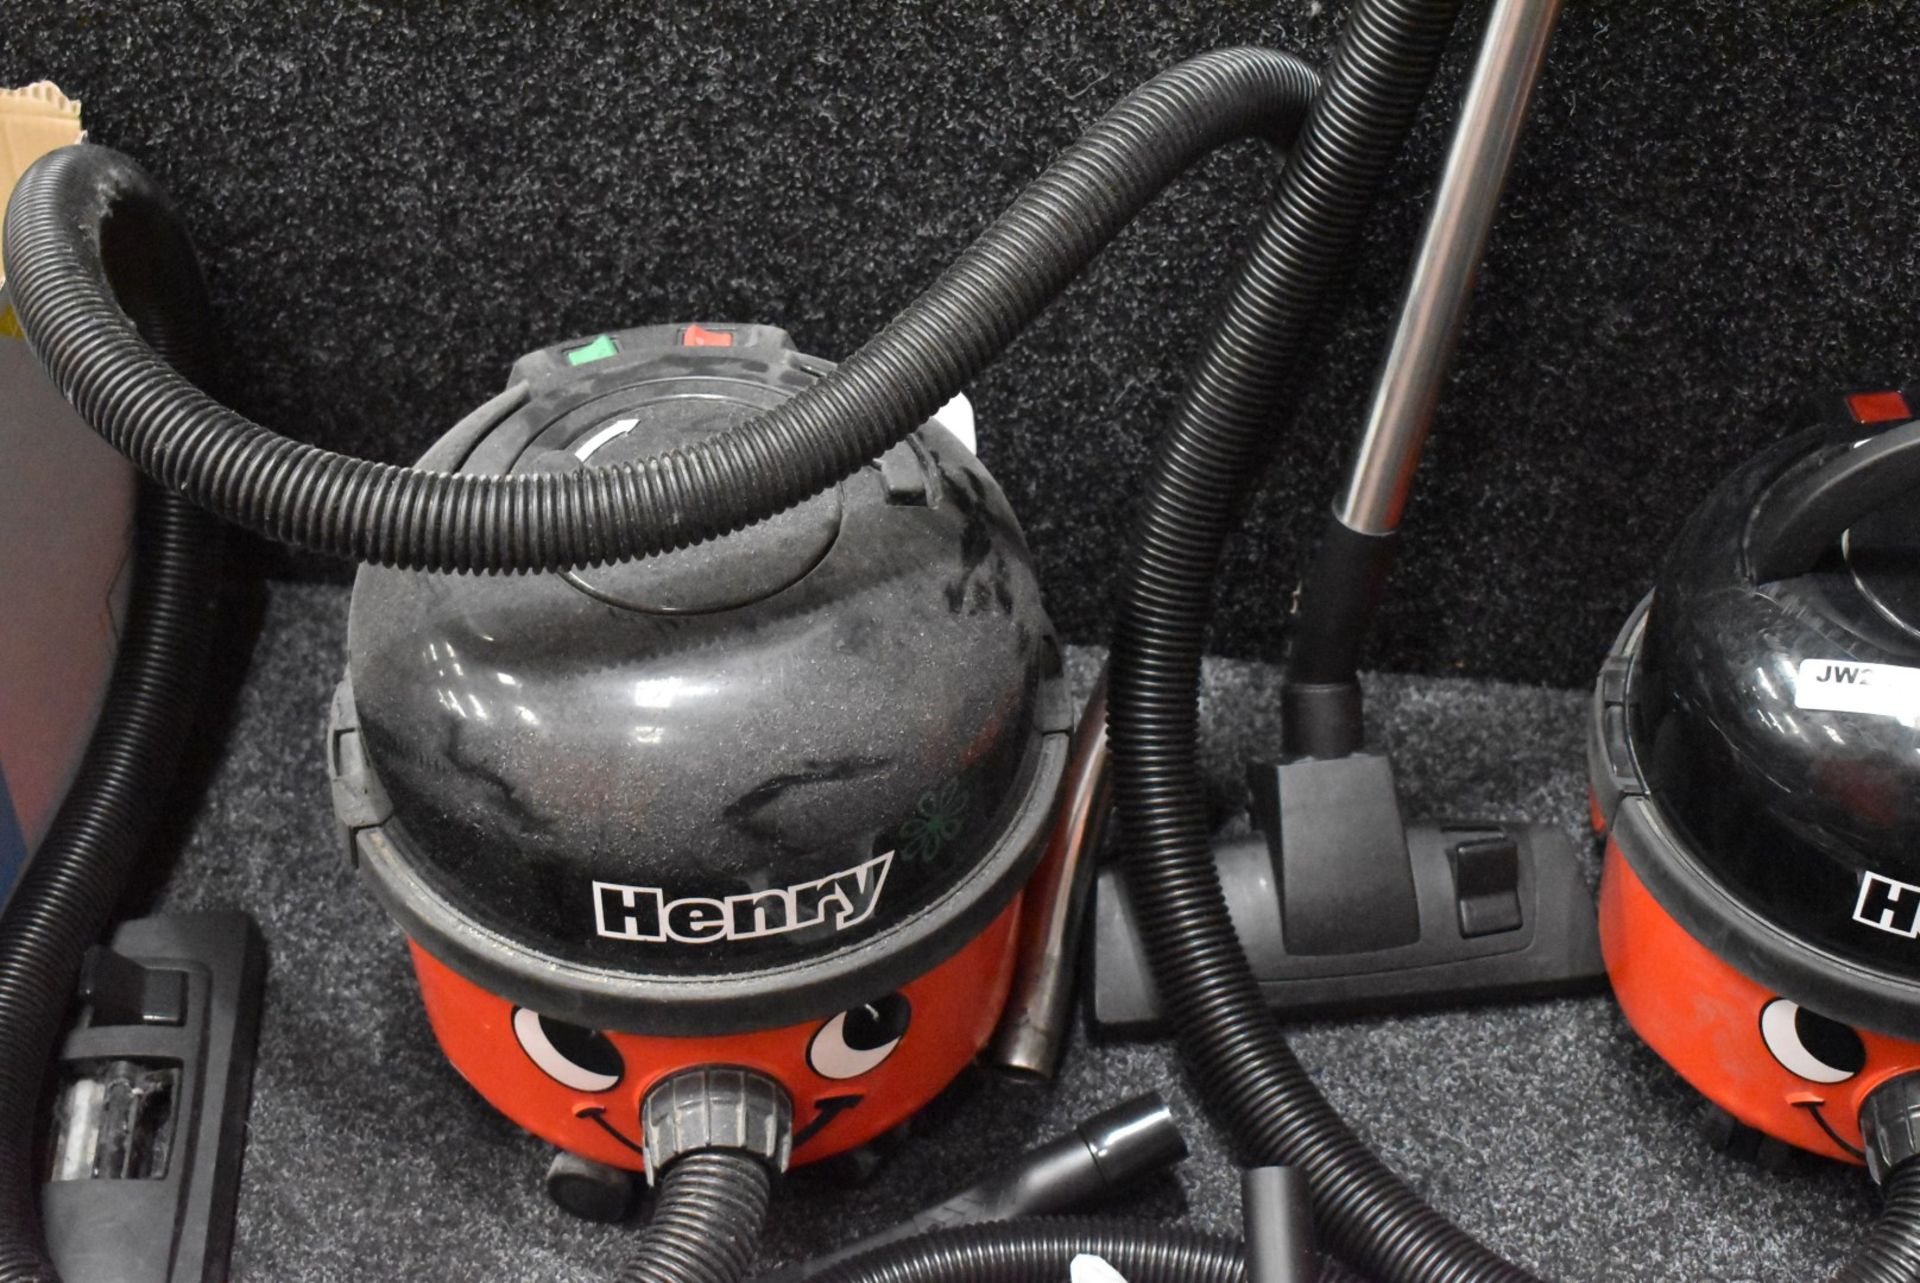 2 x Numatic Henry Hoovers With Accessories - Image 5 of 6